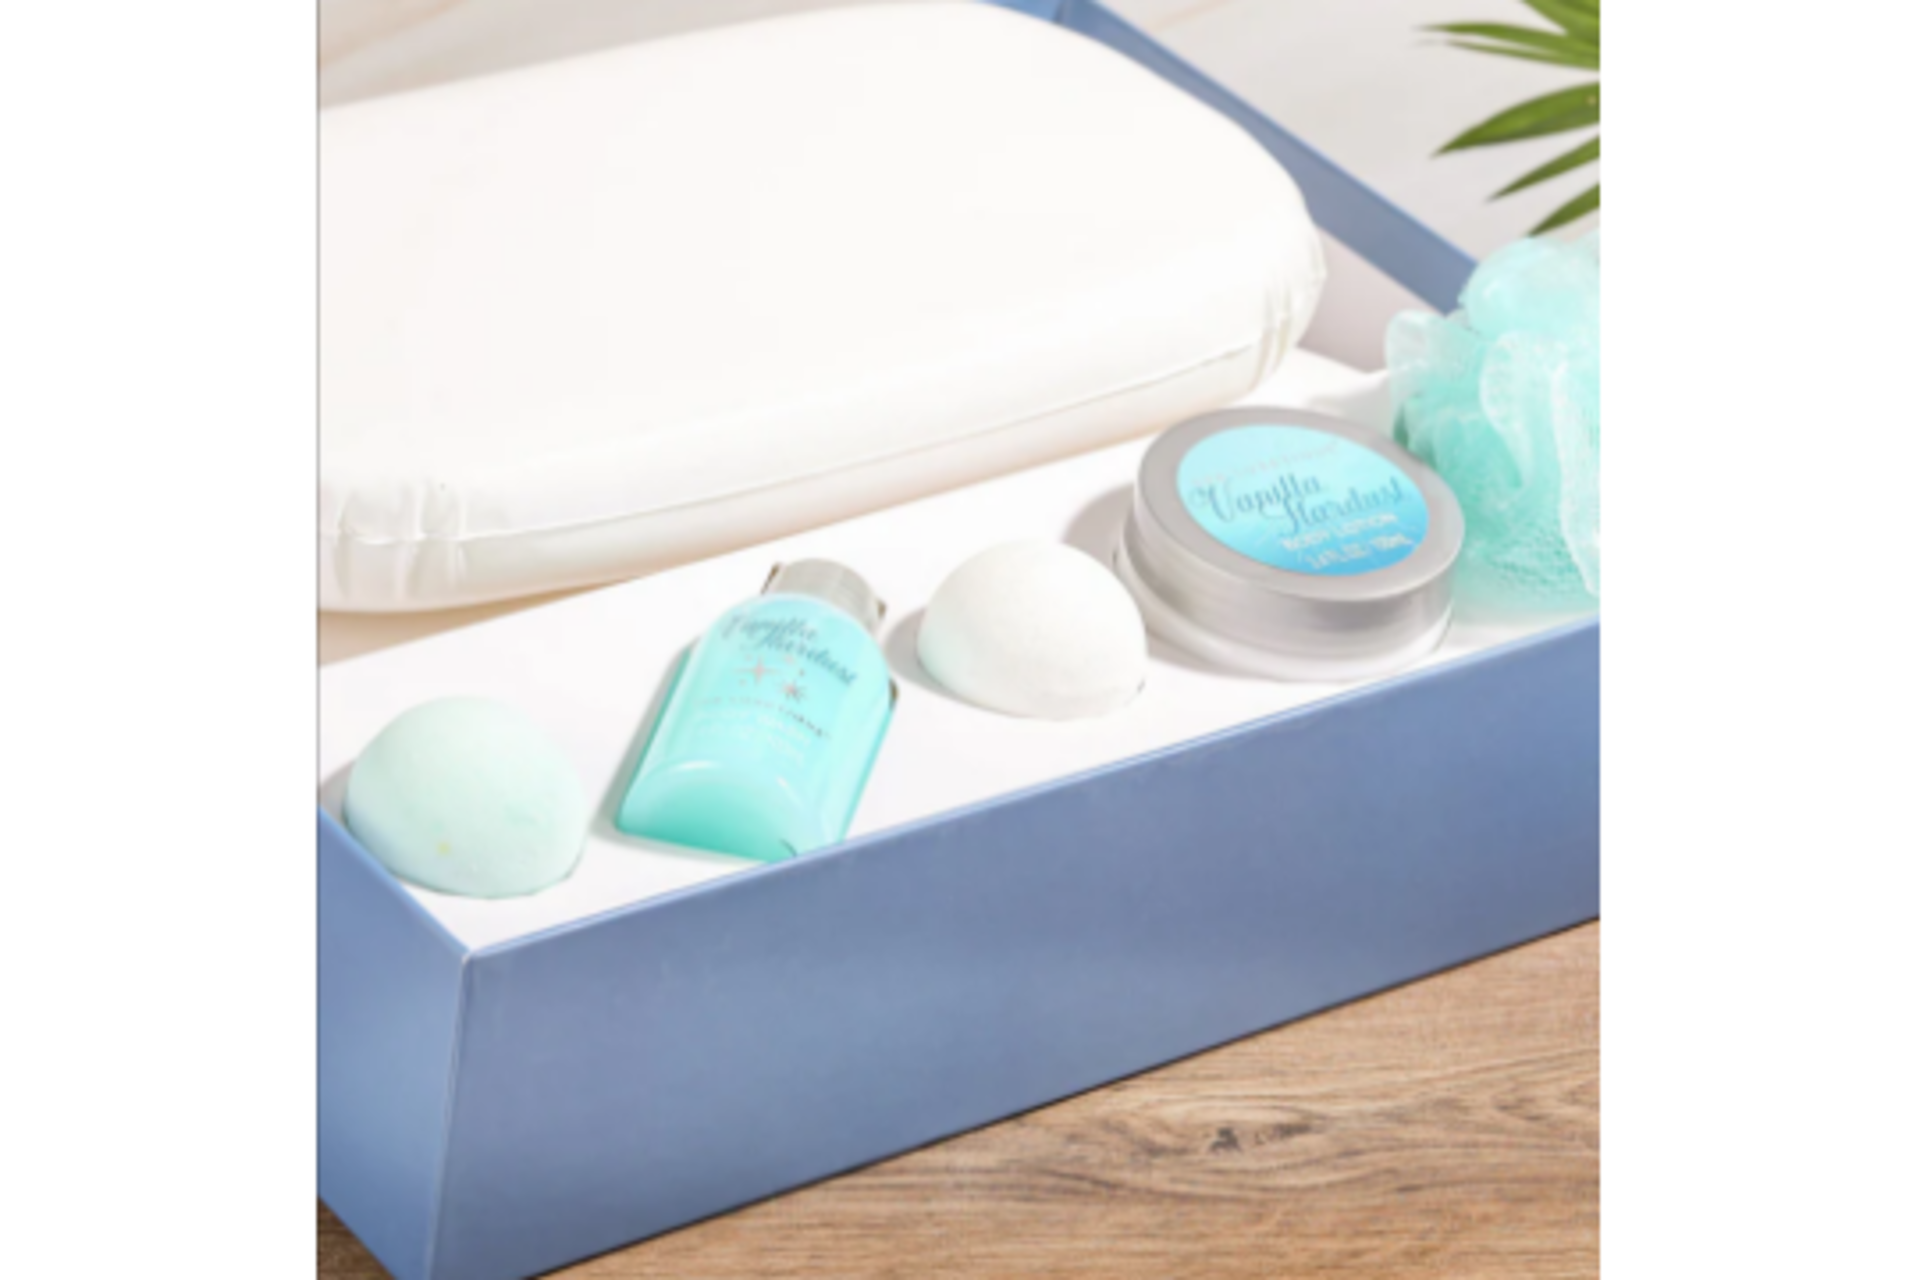 5 x New Packaged Spa Luxetique Cosmic Dreams Vanilla Spa Gift Set. (SKU:SPA-BA-01). RRP £59.88 EACH. - Image 2 of 2